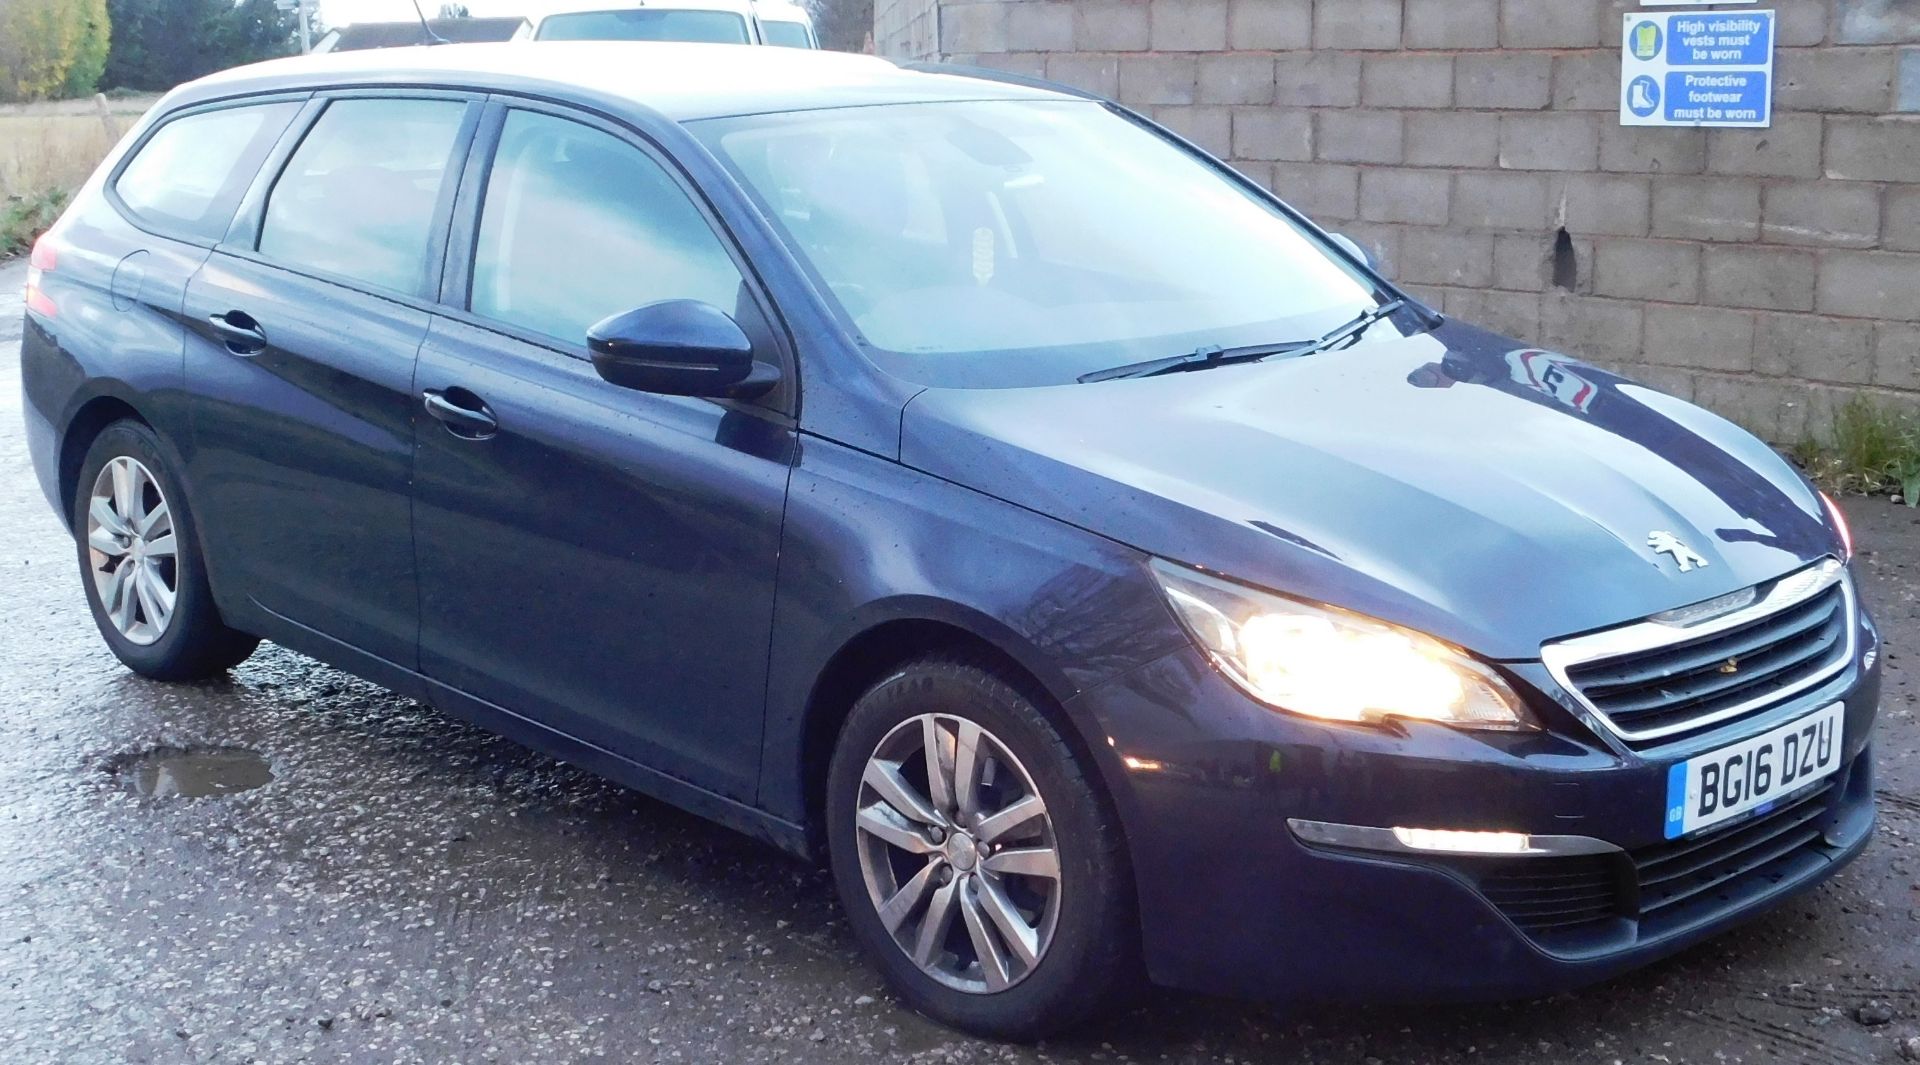 Peugeot 308 SW Active Blue S/S 1.6HDI manual five